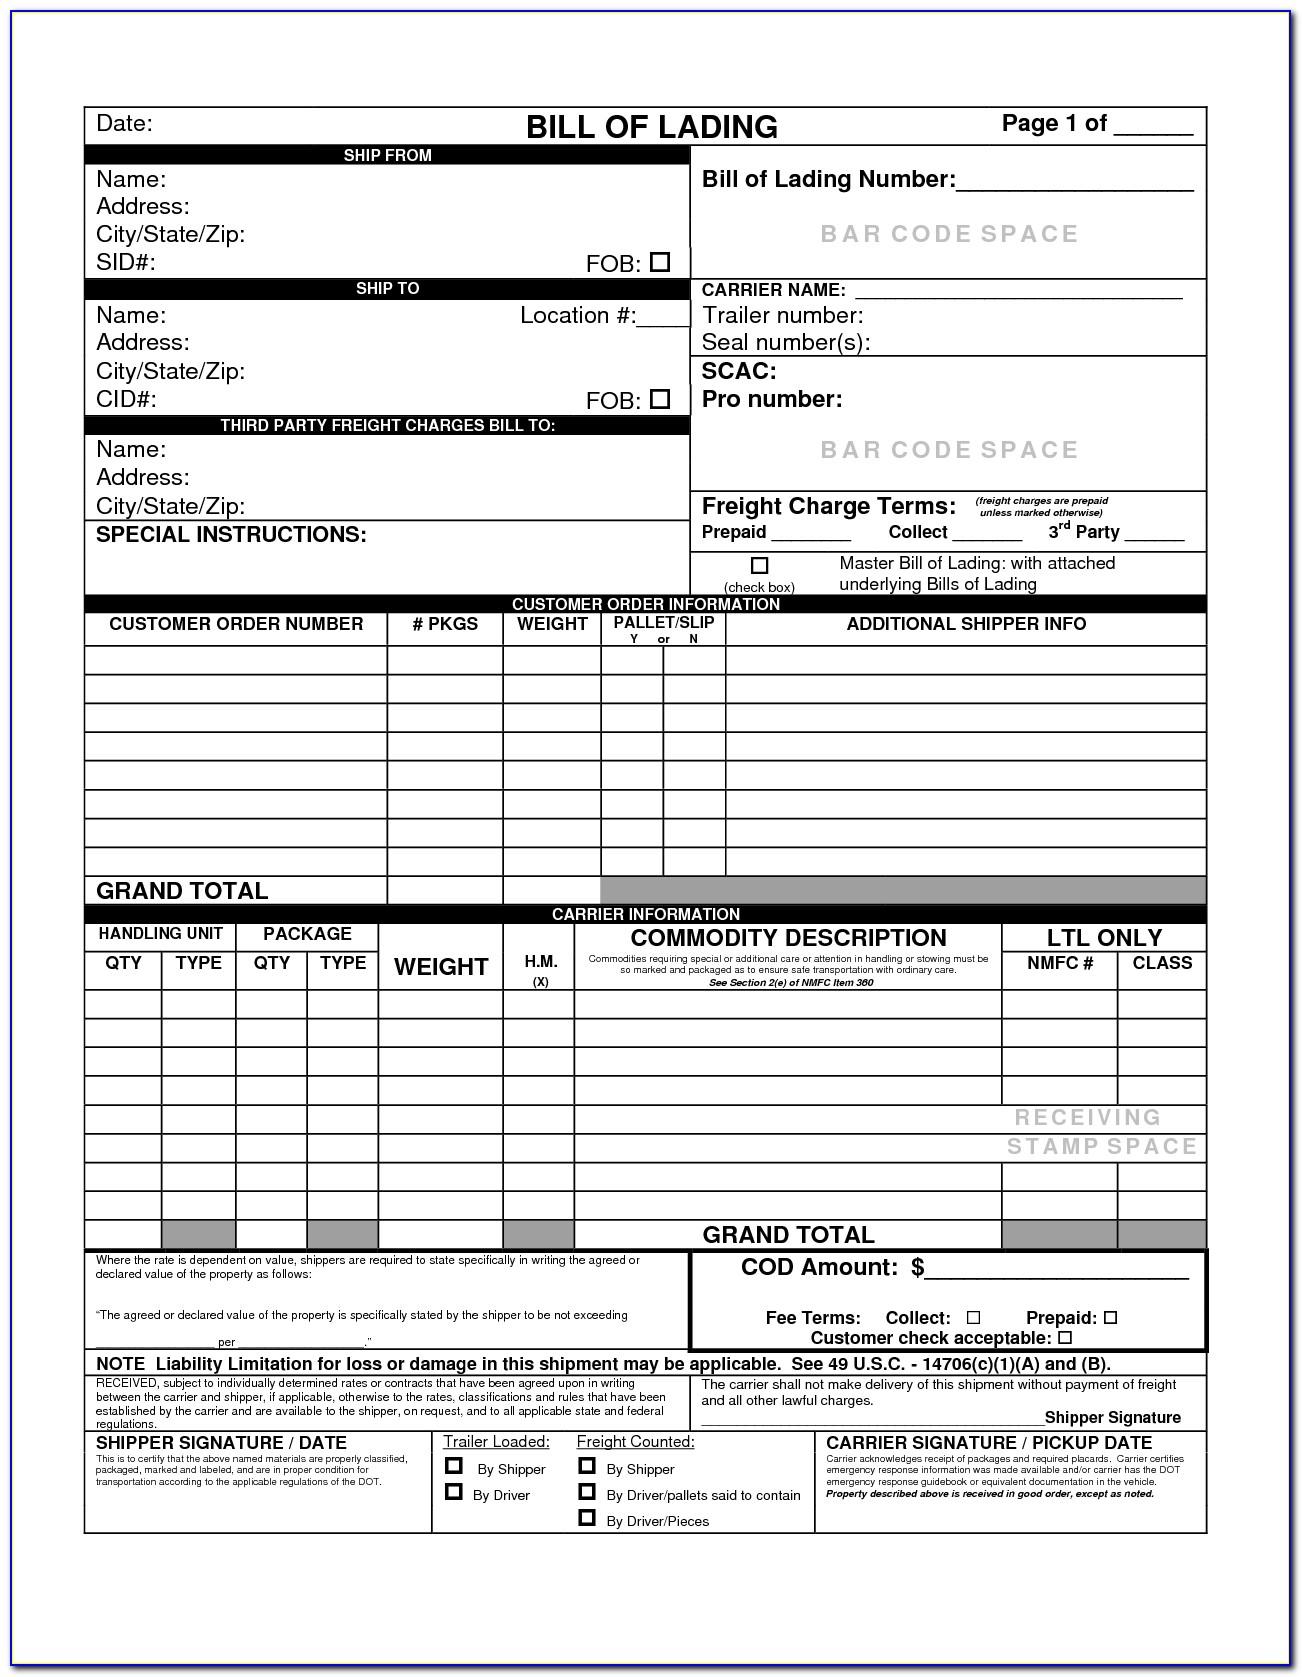 Example Of Bill Of Lading Form